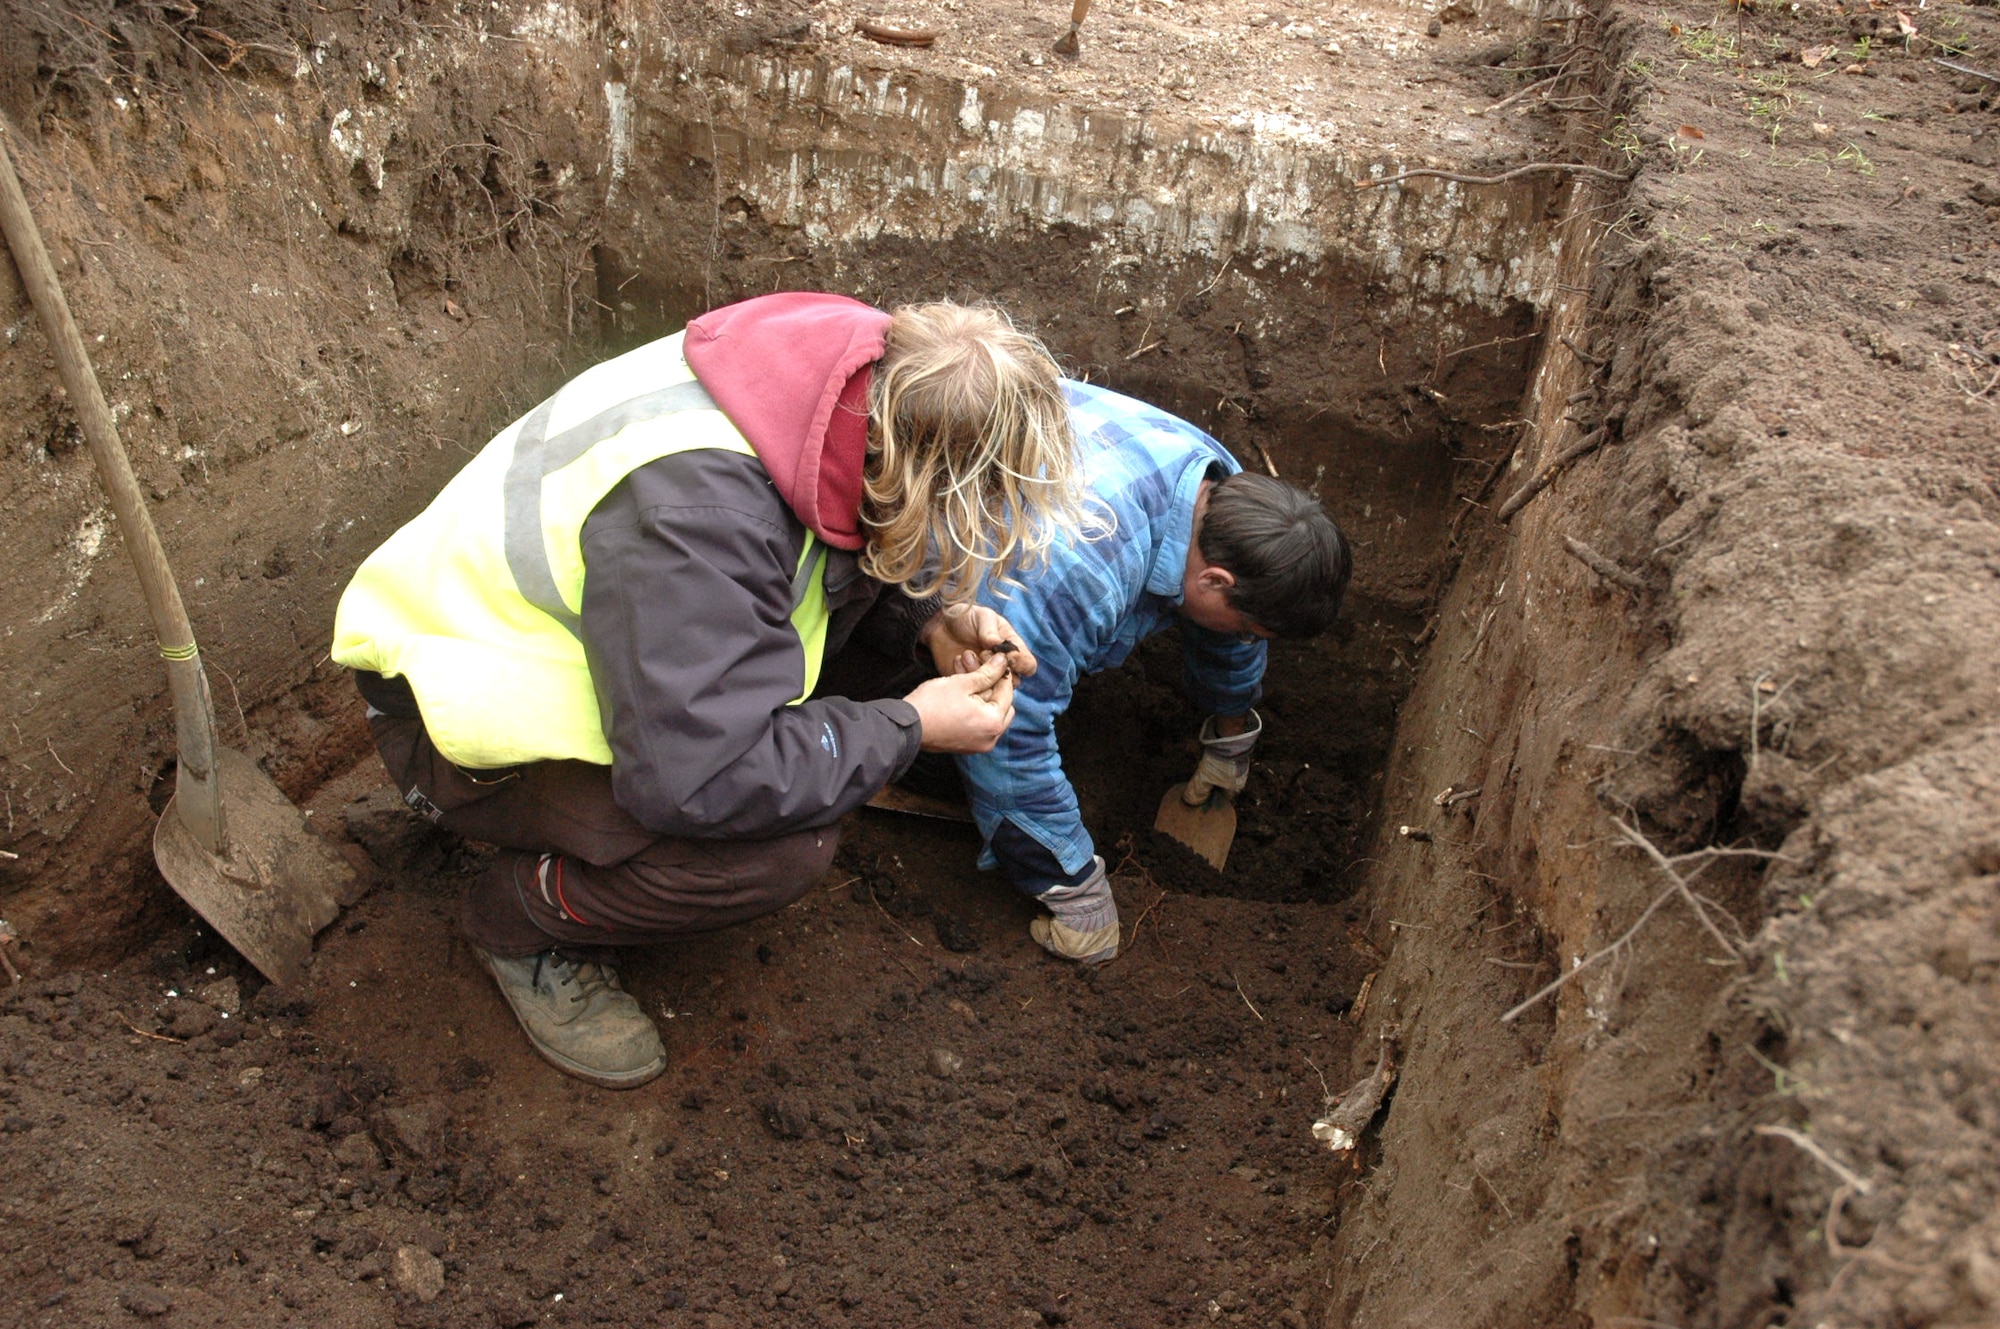 British archeologist Nick Taylor (left) inspects fragments of rock from a dig site as fellow archeologist Jonathan Van Jennians continues to dig. The trial trenches are being dug at RAF Mildenhall, England where new officer housing units are to be built. The United Kingdom requires all construction projects go through this dig to ensure no  potential historical artifacts are destoyed. (U.S. Air Force photo/Tech. Sgt. Scott Wakefield)